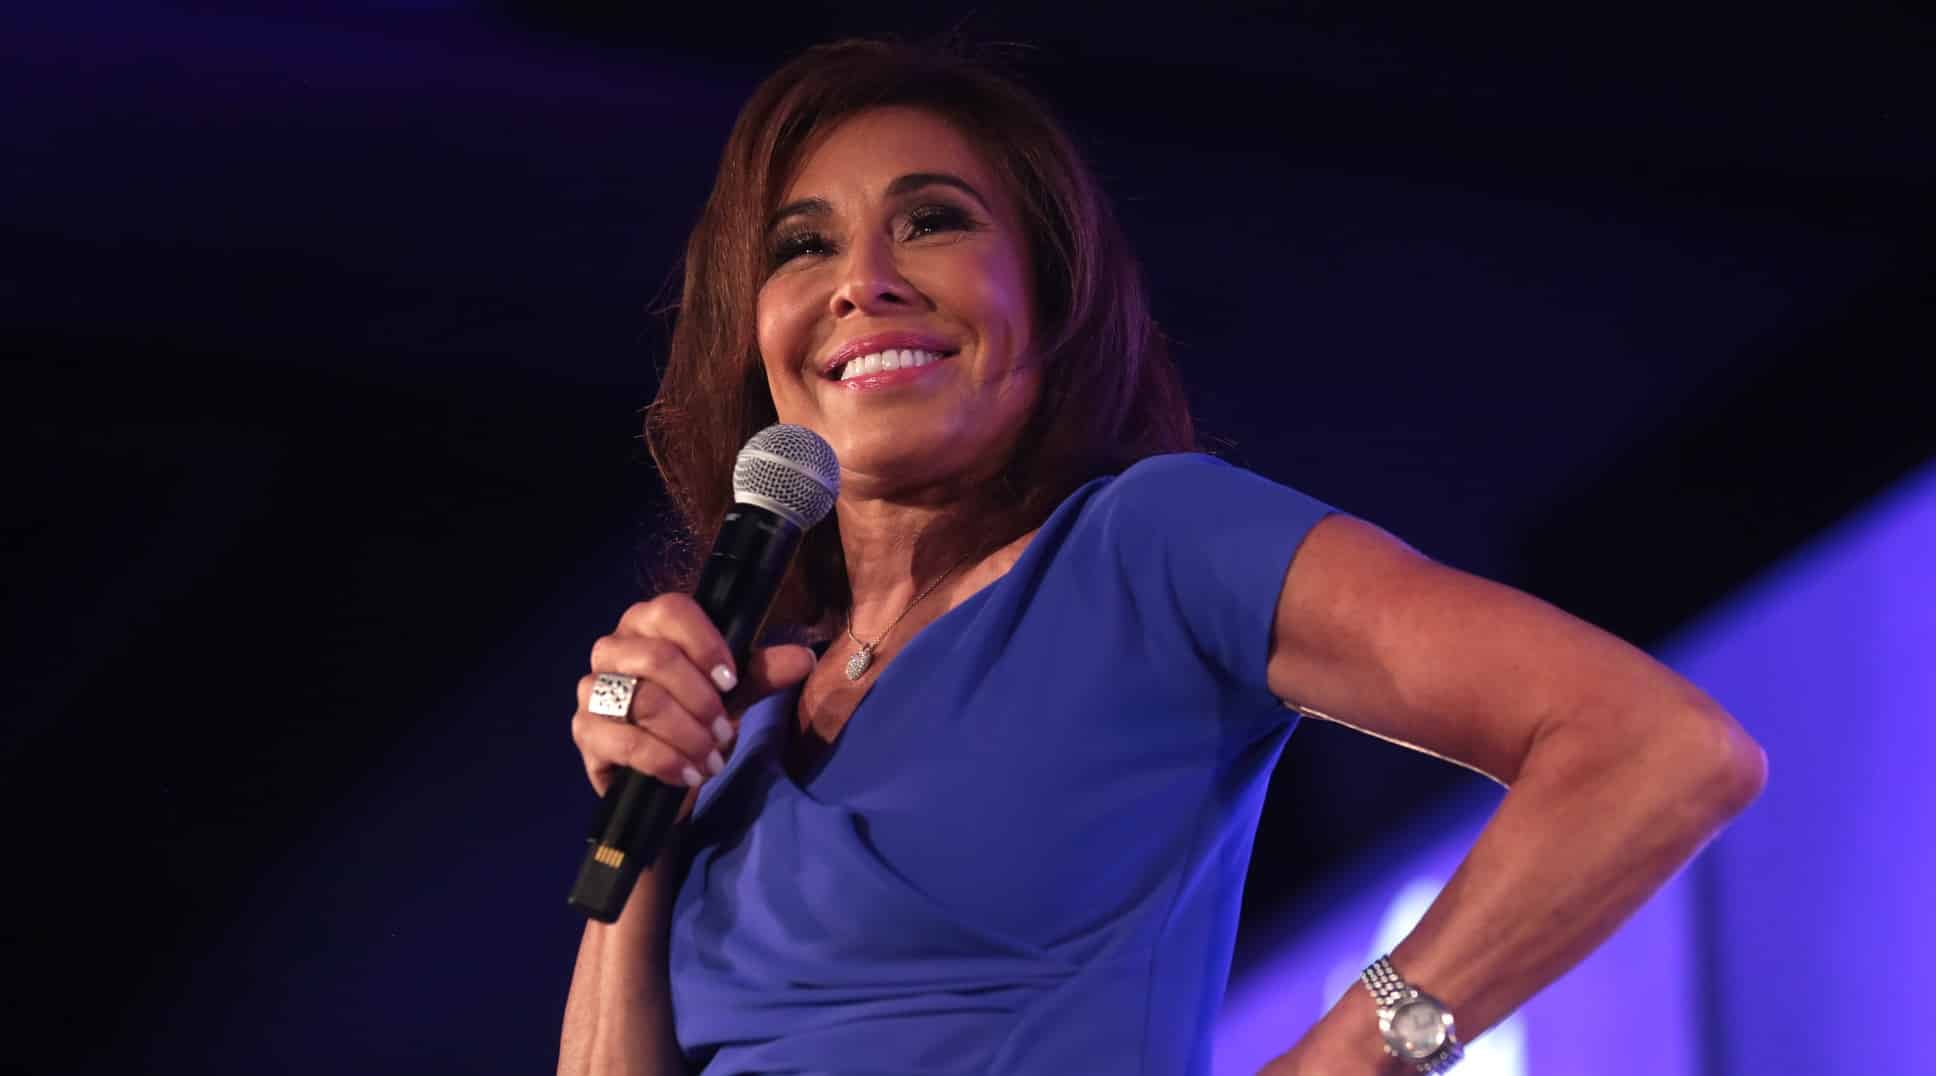 Fox News condemns the words of Jeanine Pirro talking about Ilhan Omar